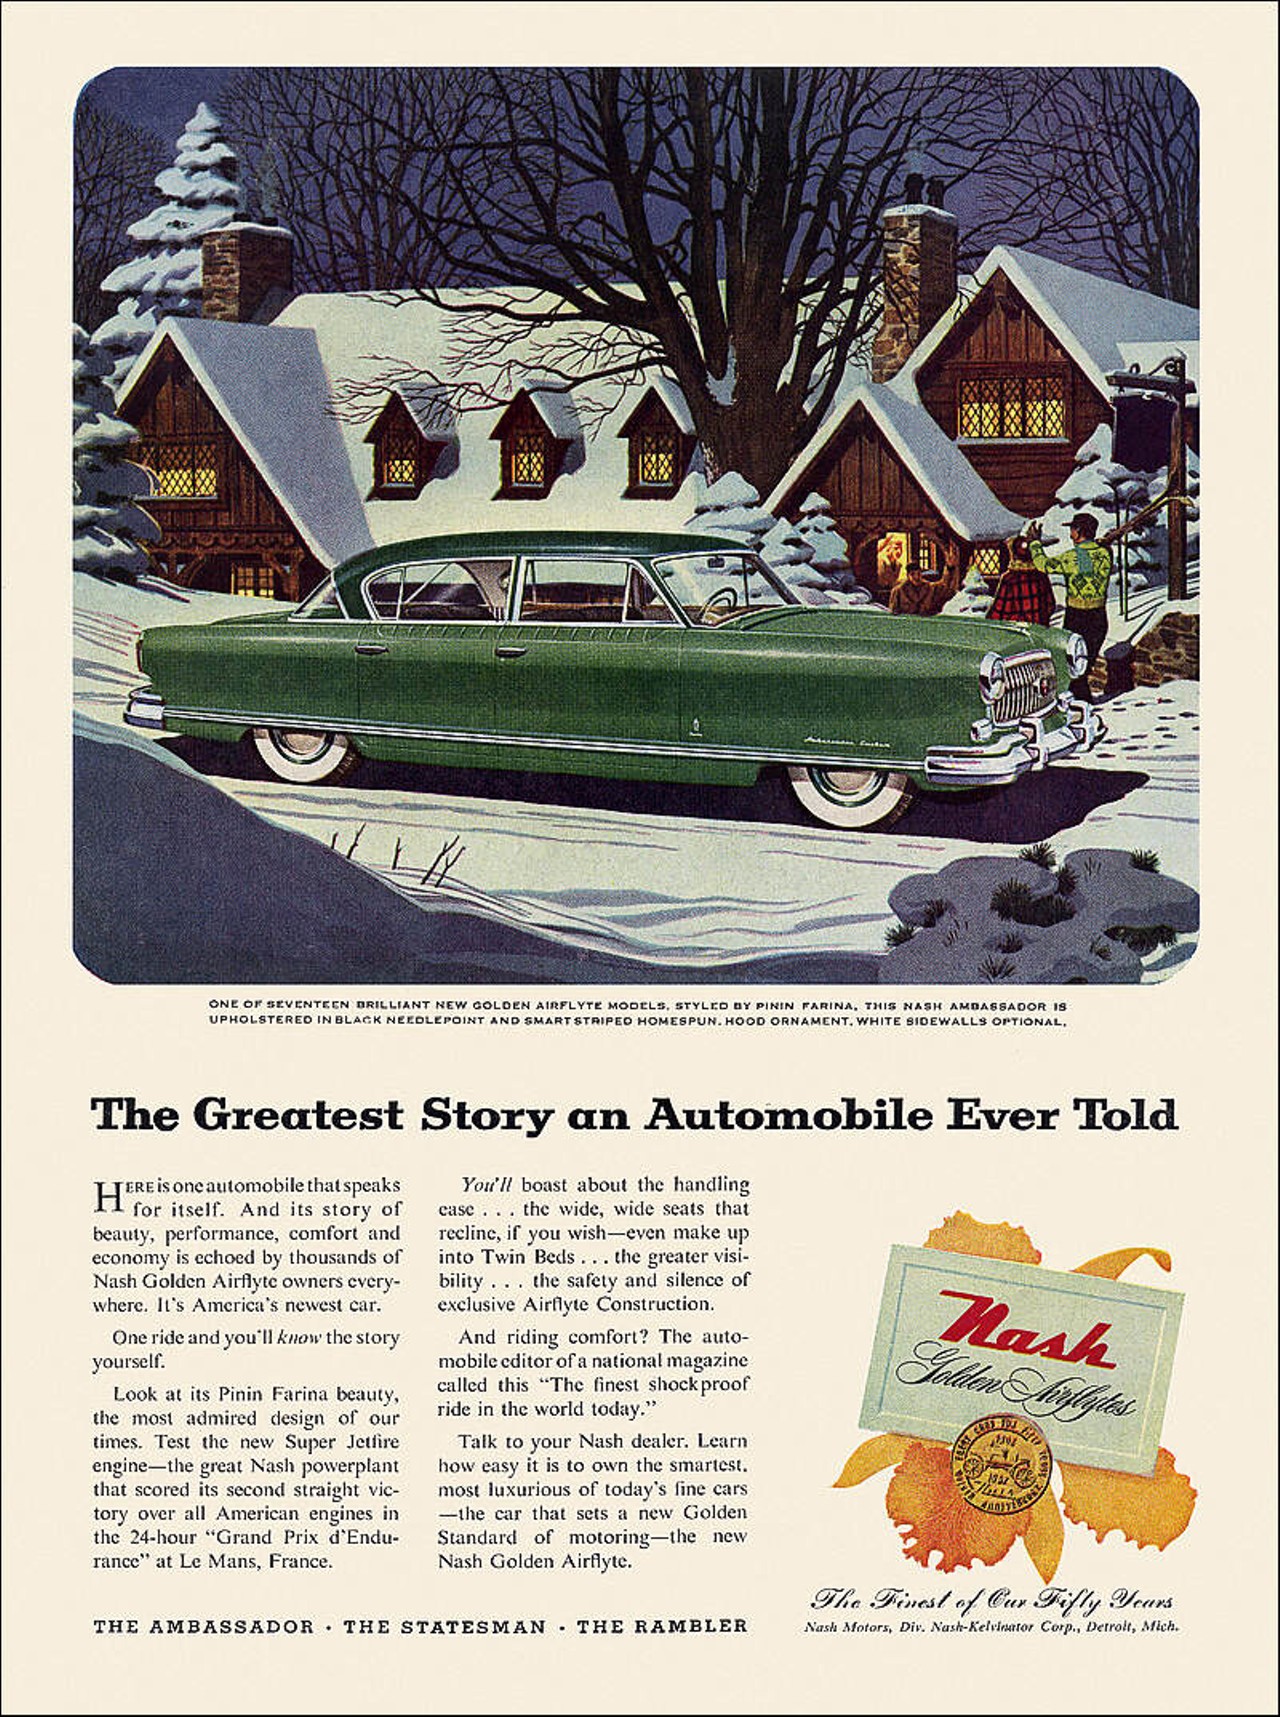 Nash Airflyte ad, 1952 (Image courtesy of alsis35, Flickr Creative Commons)